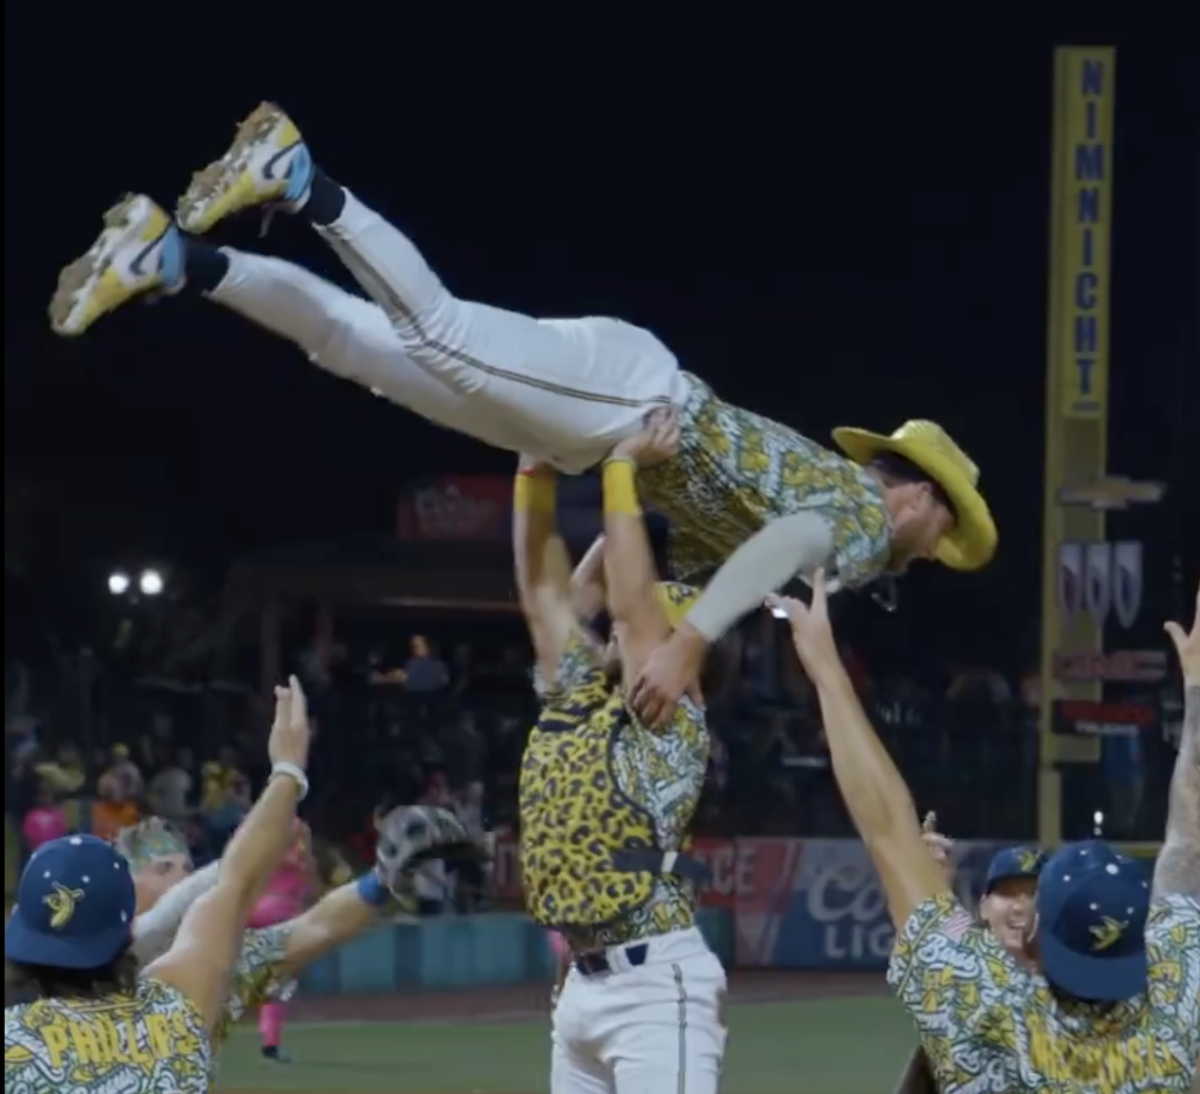 The Savannah Bananas perfectly recreated the final dance scene from Dirty Dancing